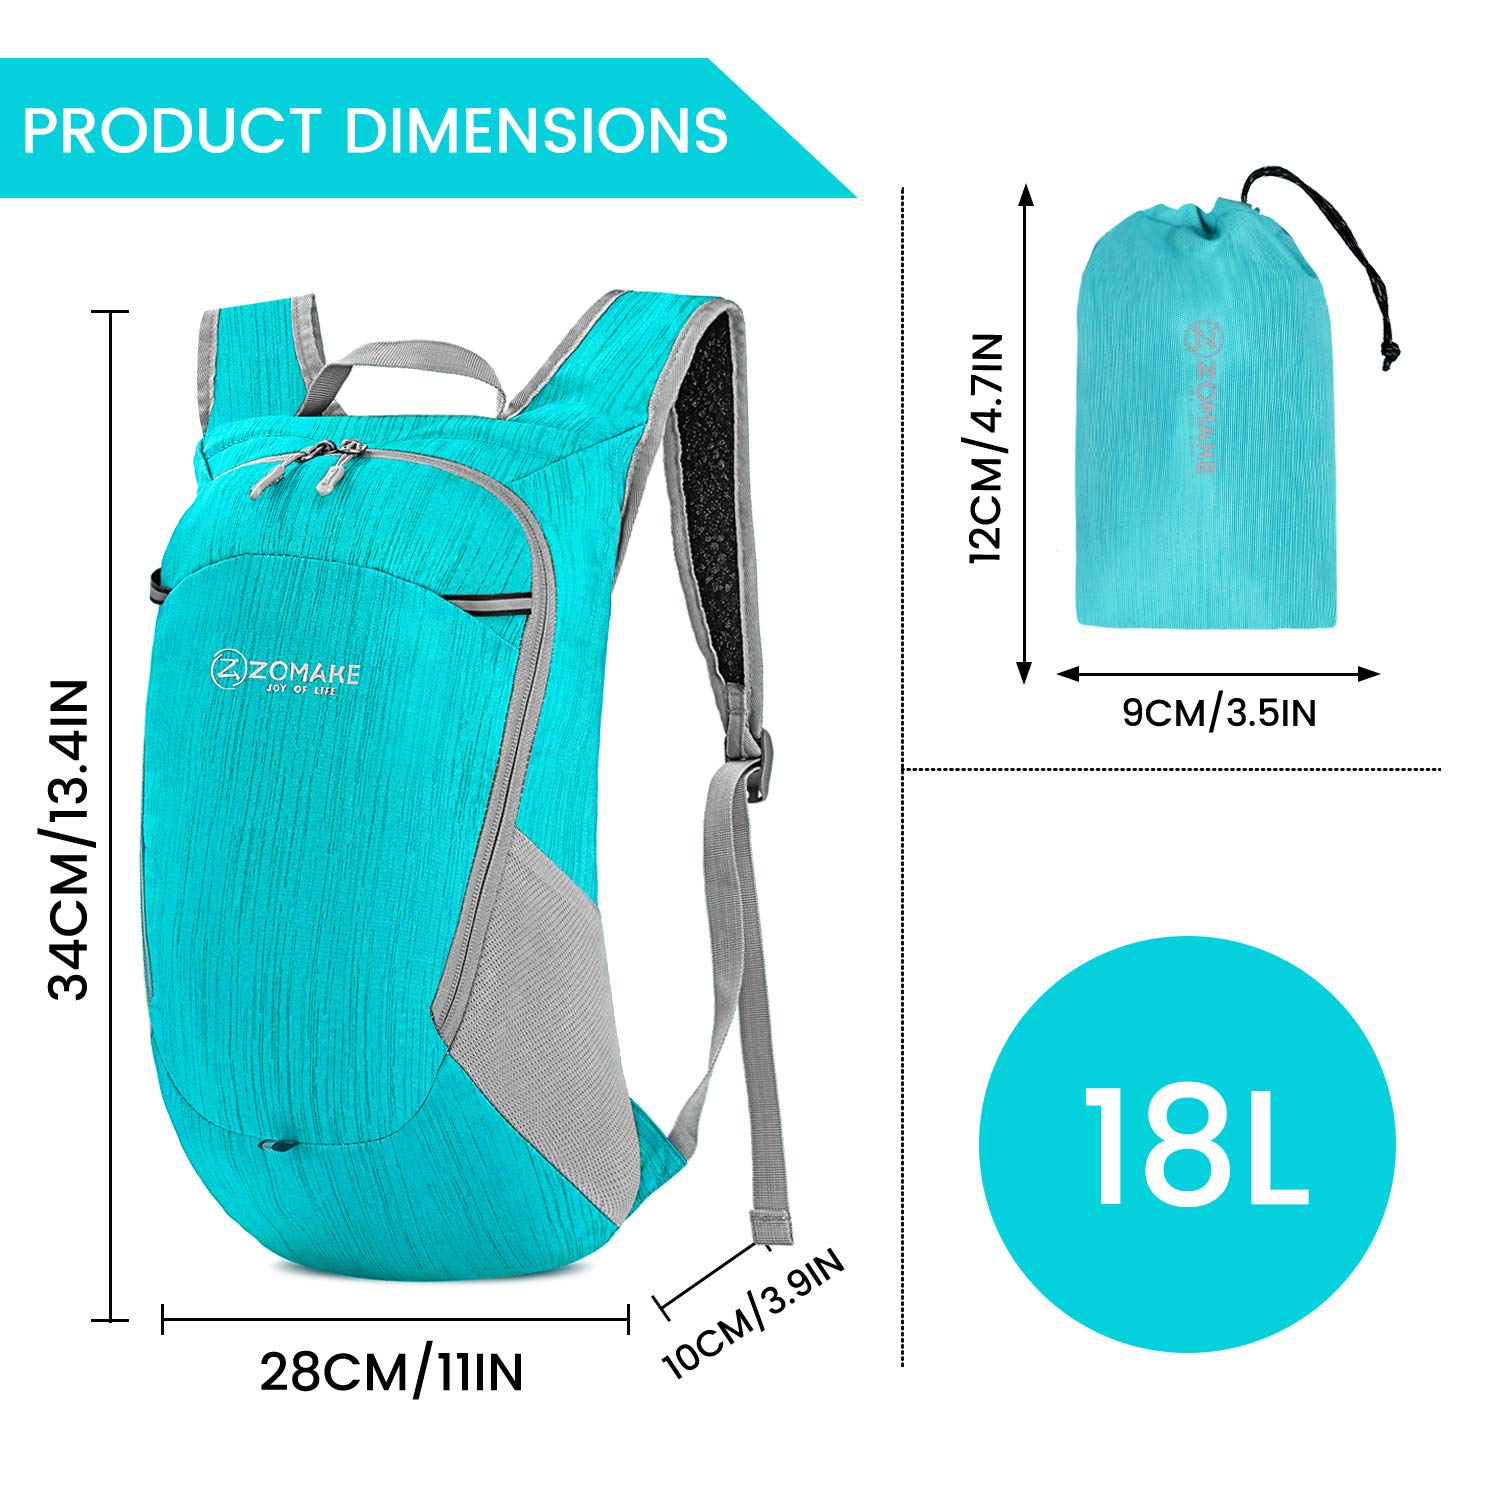 ZOMAKE Ultra Lightweight Packable Backpack 18L - Small Foldable Hiking Backpacks Water Resistant Folding Daypack for Travel(Aqua Blue)